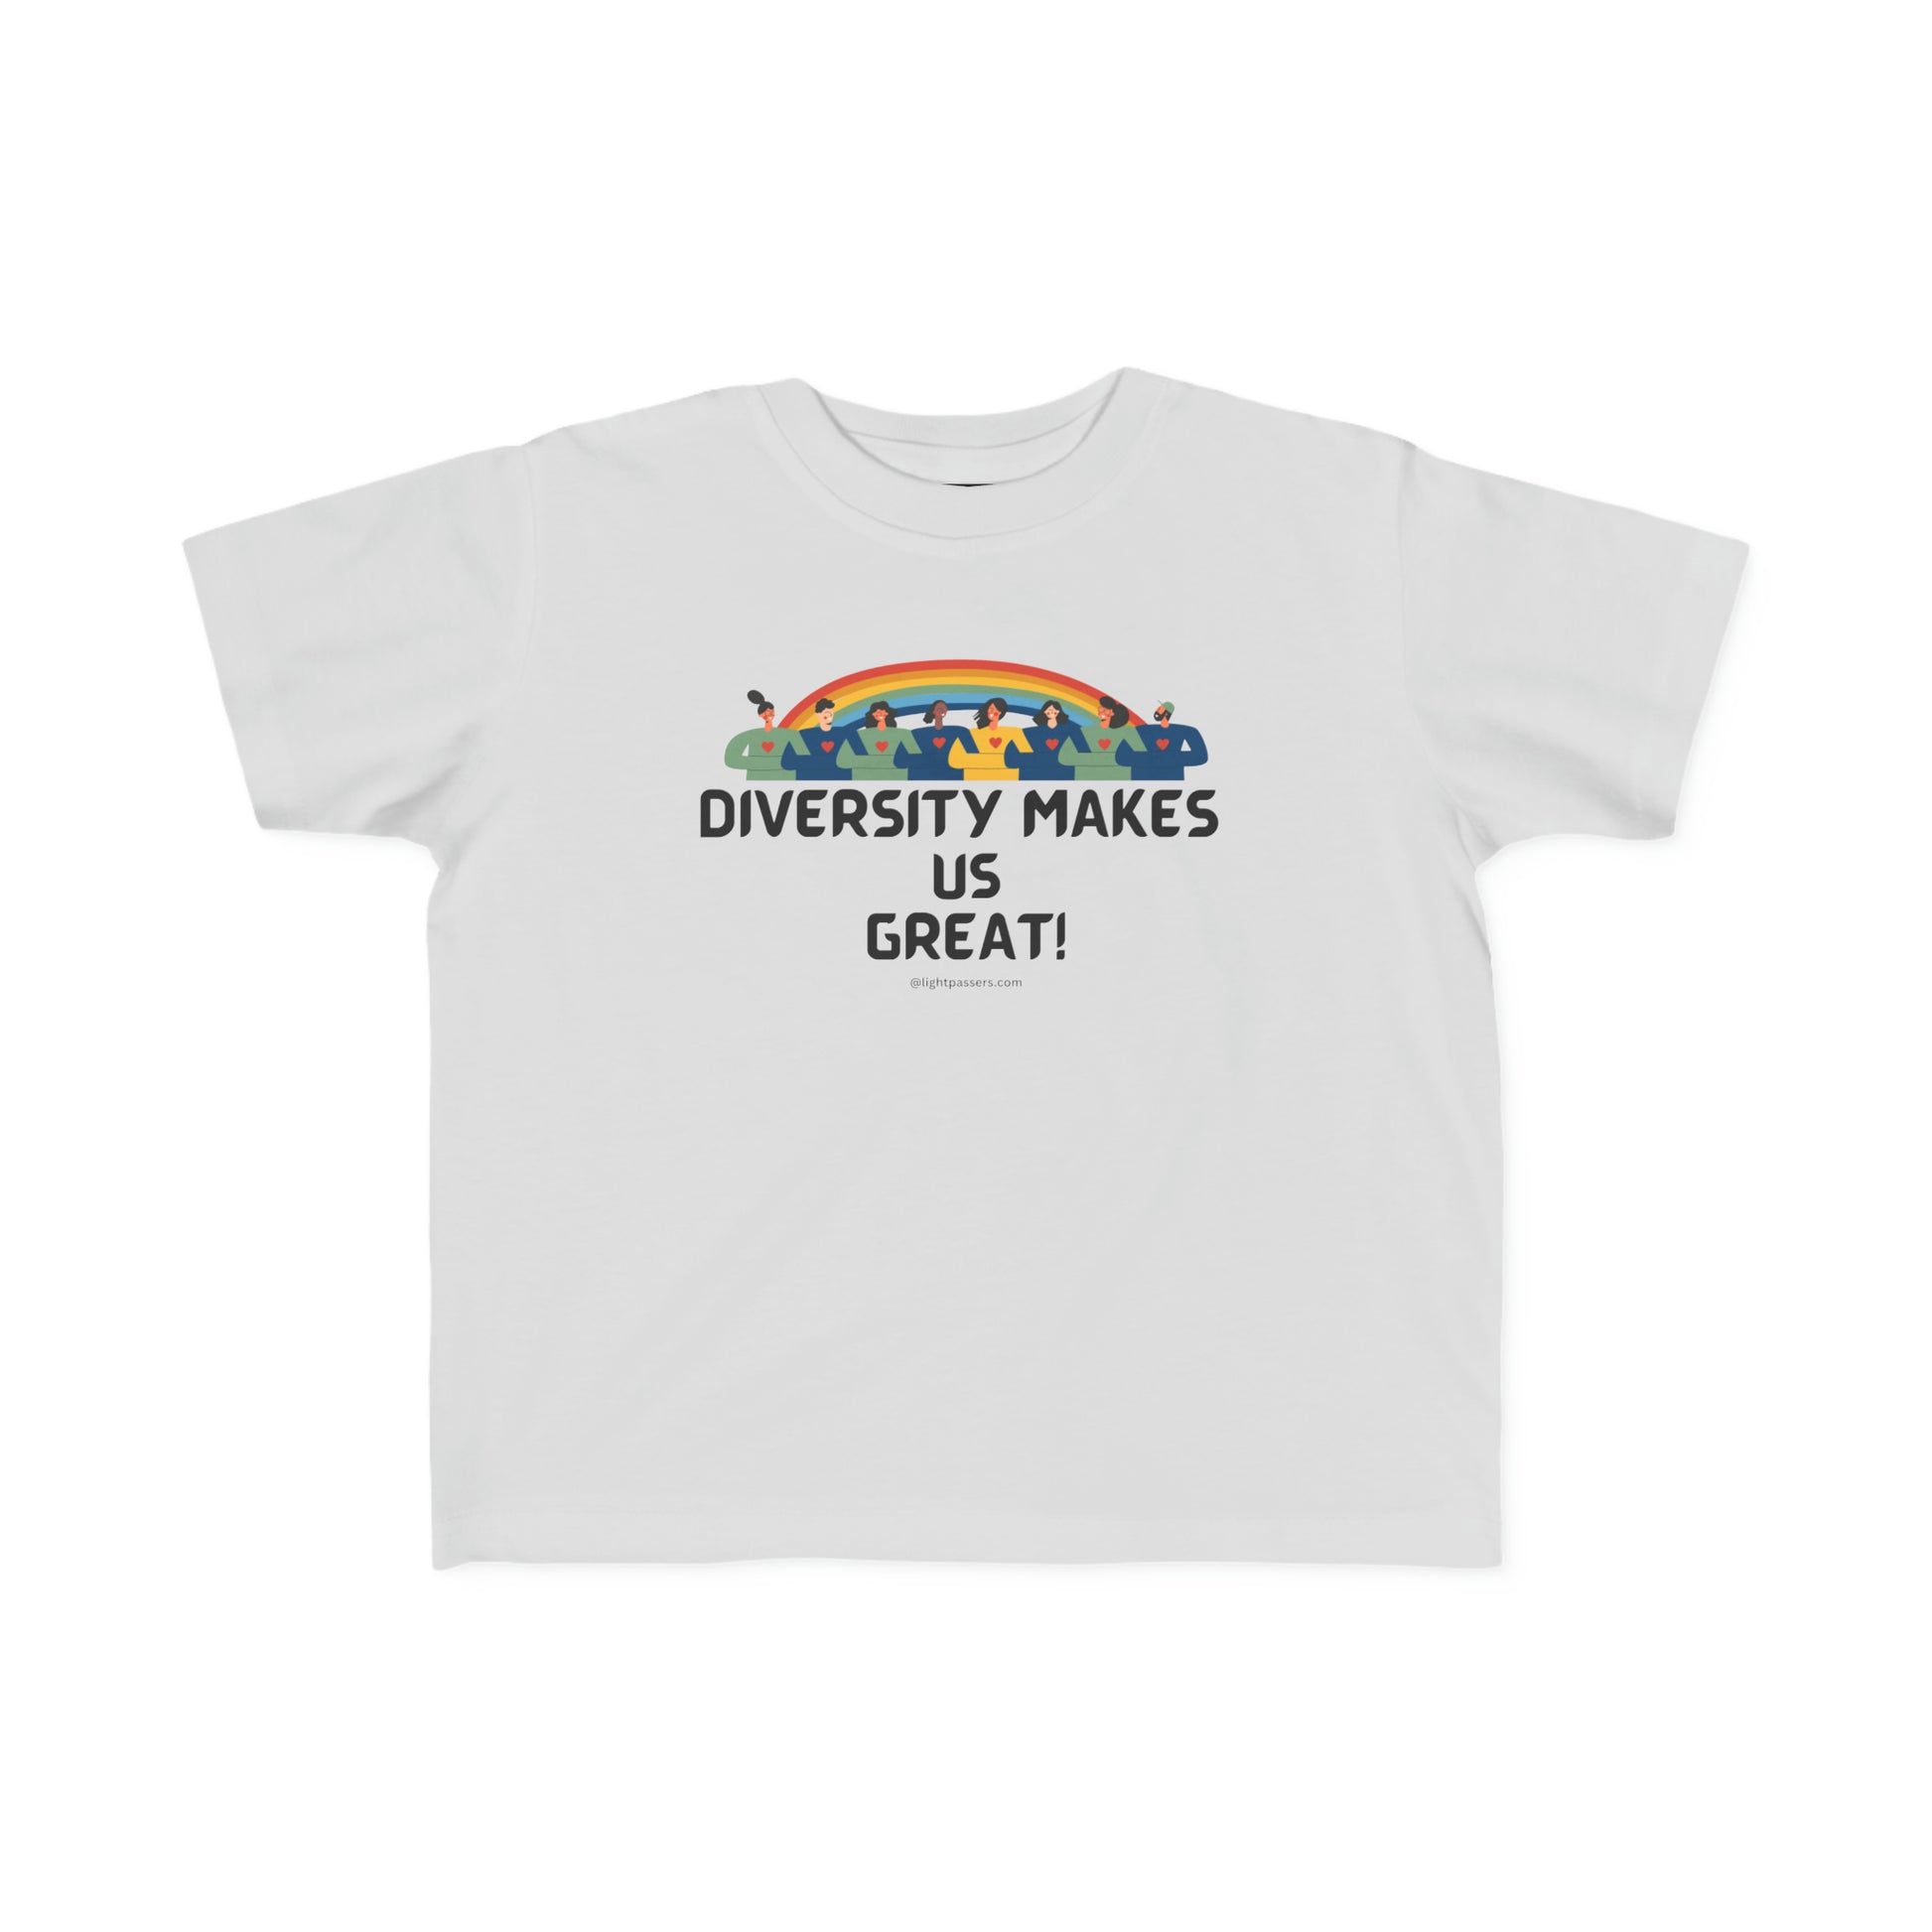 A toddler's white tee featuring a diverse group of people graphic. Soft 100% combed cotton, 4.5 oz/yd² fabric, tear-away label, classic fit. Ideal for sensitive skin, true to size.